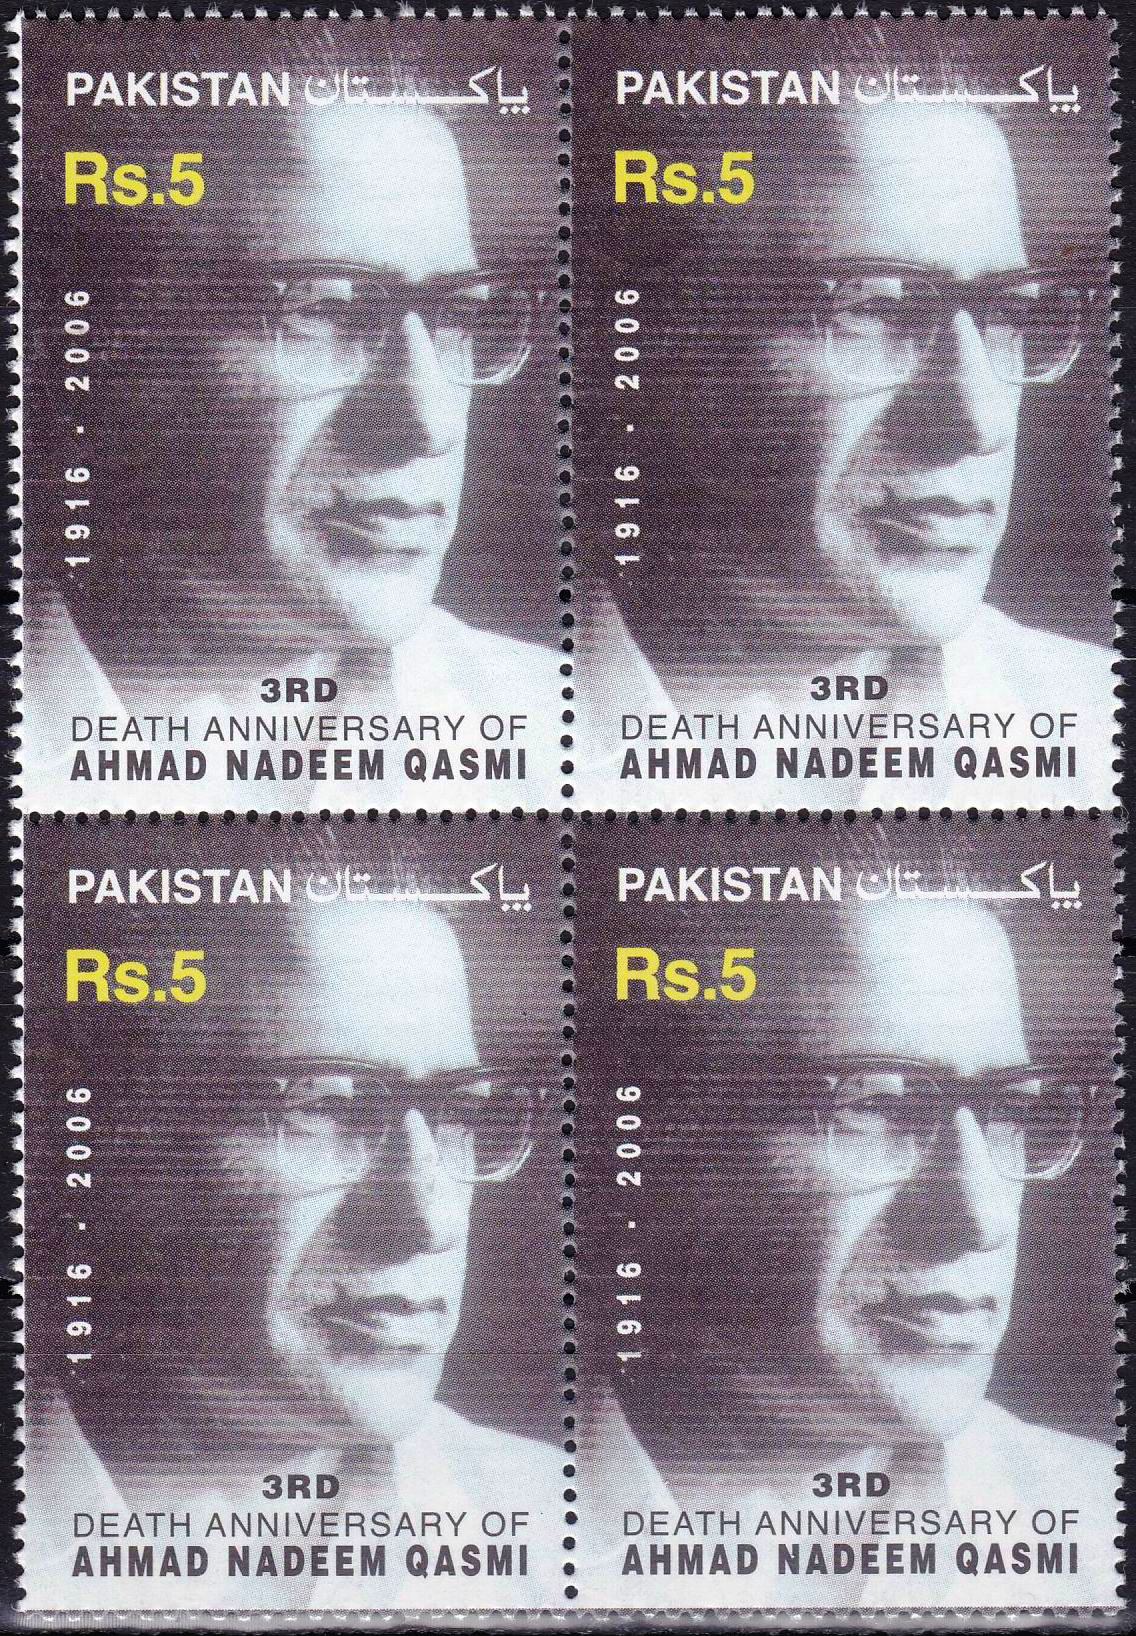 Pakistan Stamps 2000 UN High Commissioner For Refugees - Click Image to Close